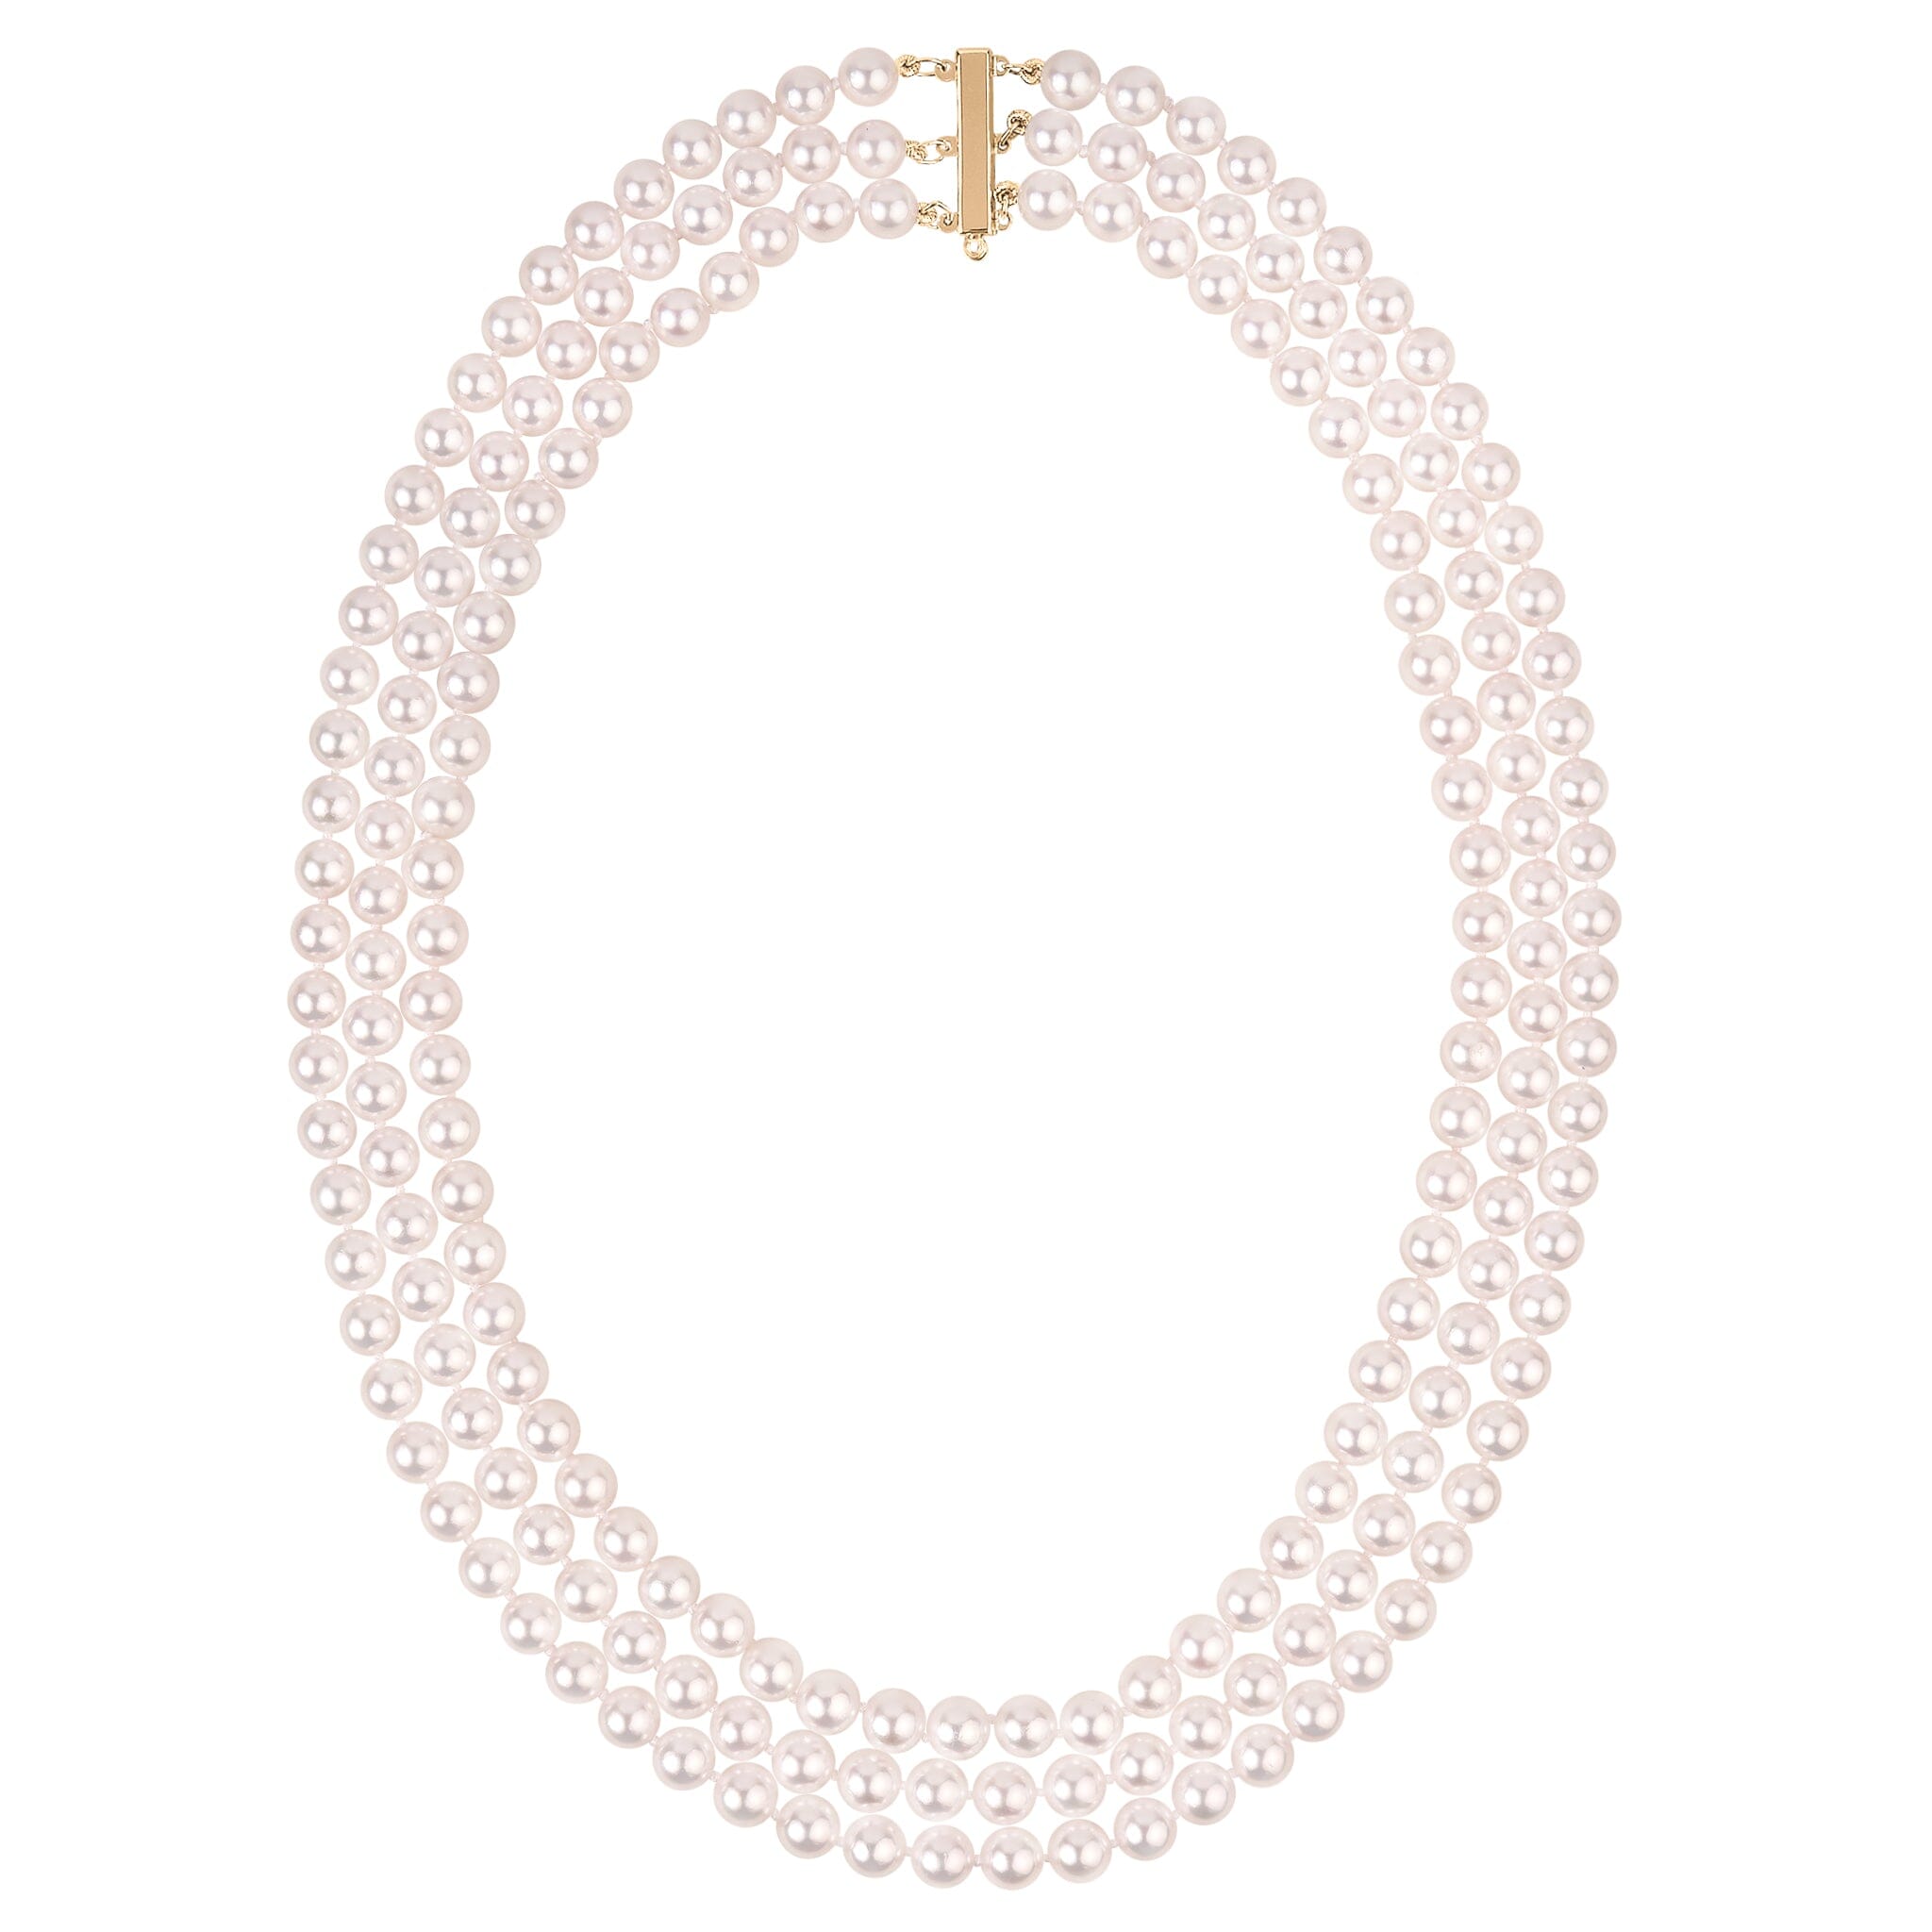 6.0-6.5 mm Triple Strand White Akoya AAA Pearl Necklace